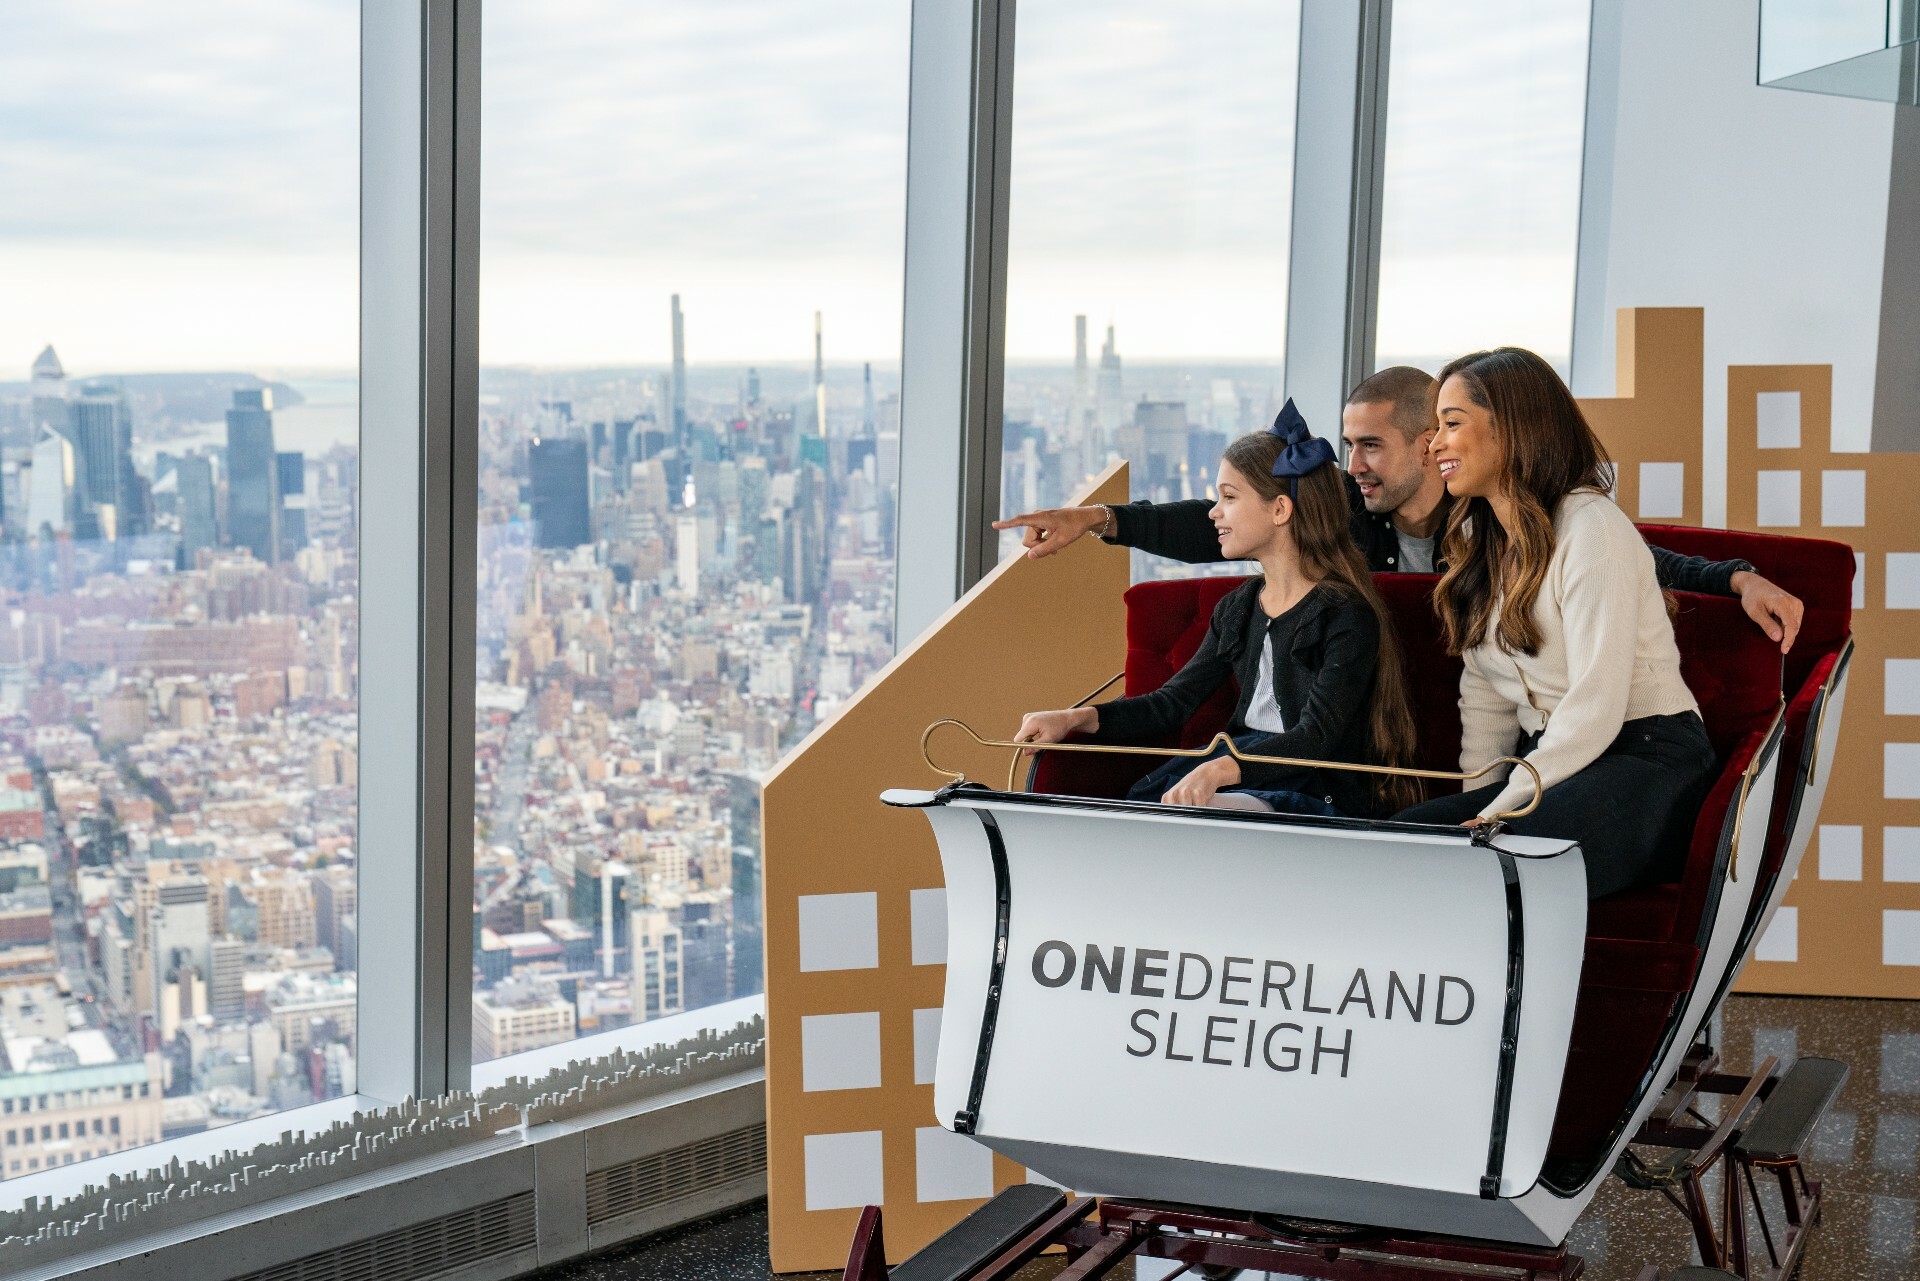 Winter 'ONEDERLAND' is back after three years at One World Observatory